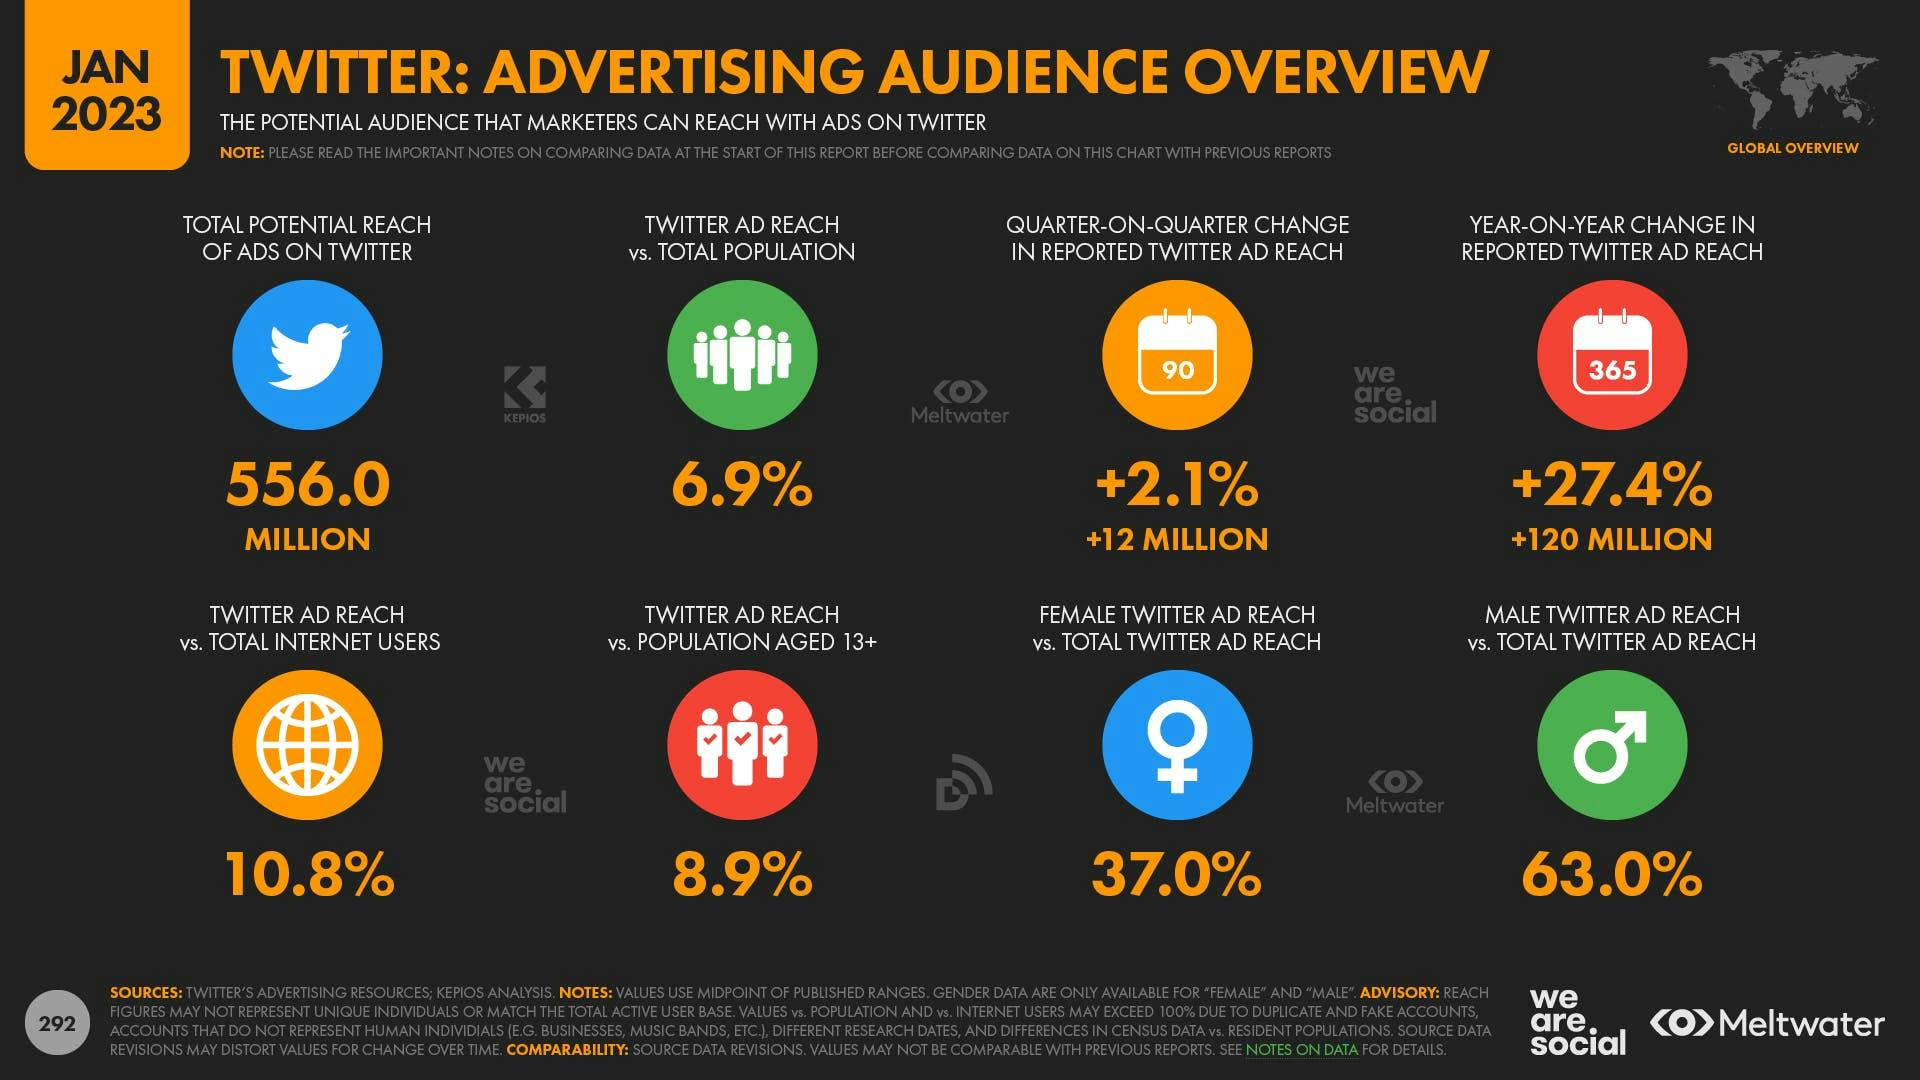 Twitter: Advertising audience overview